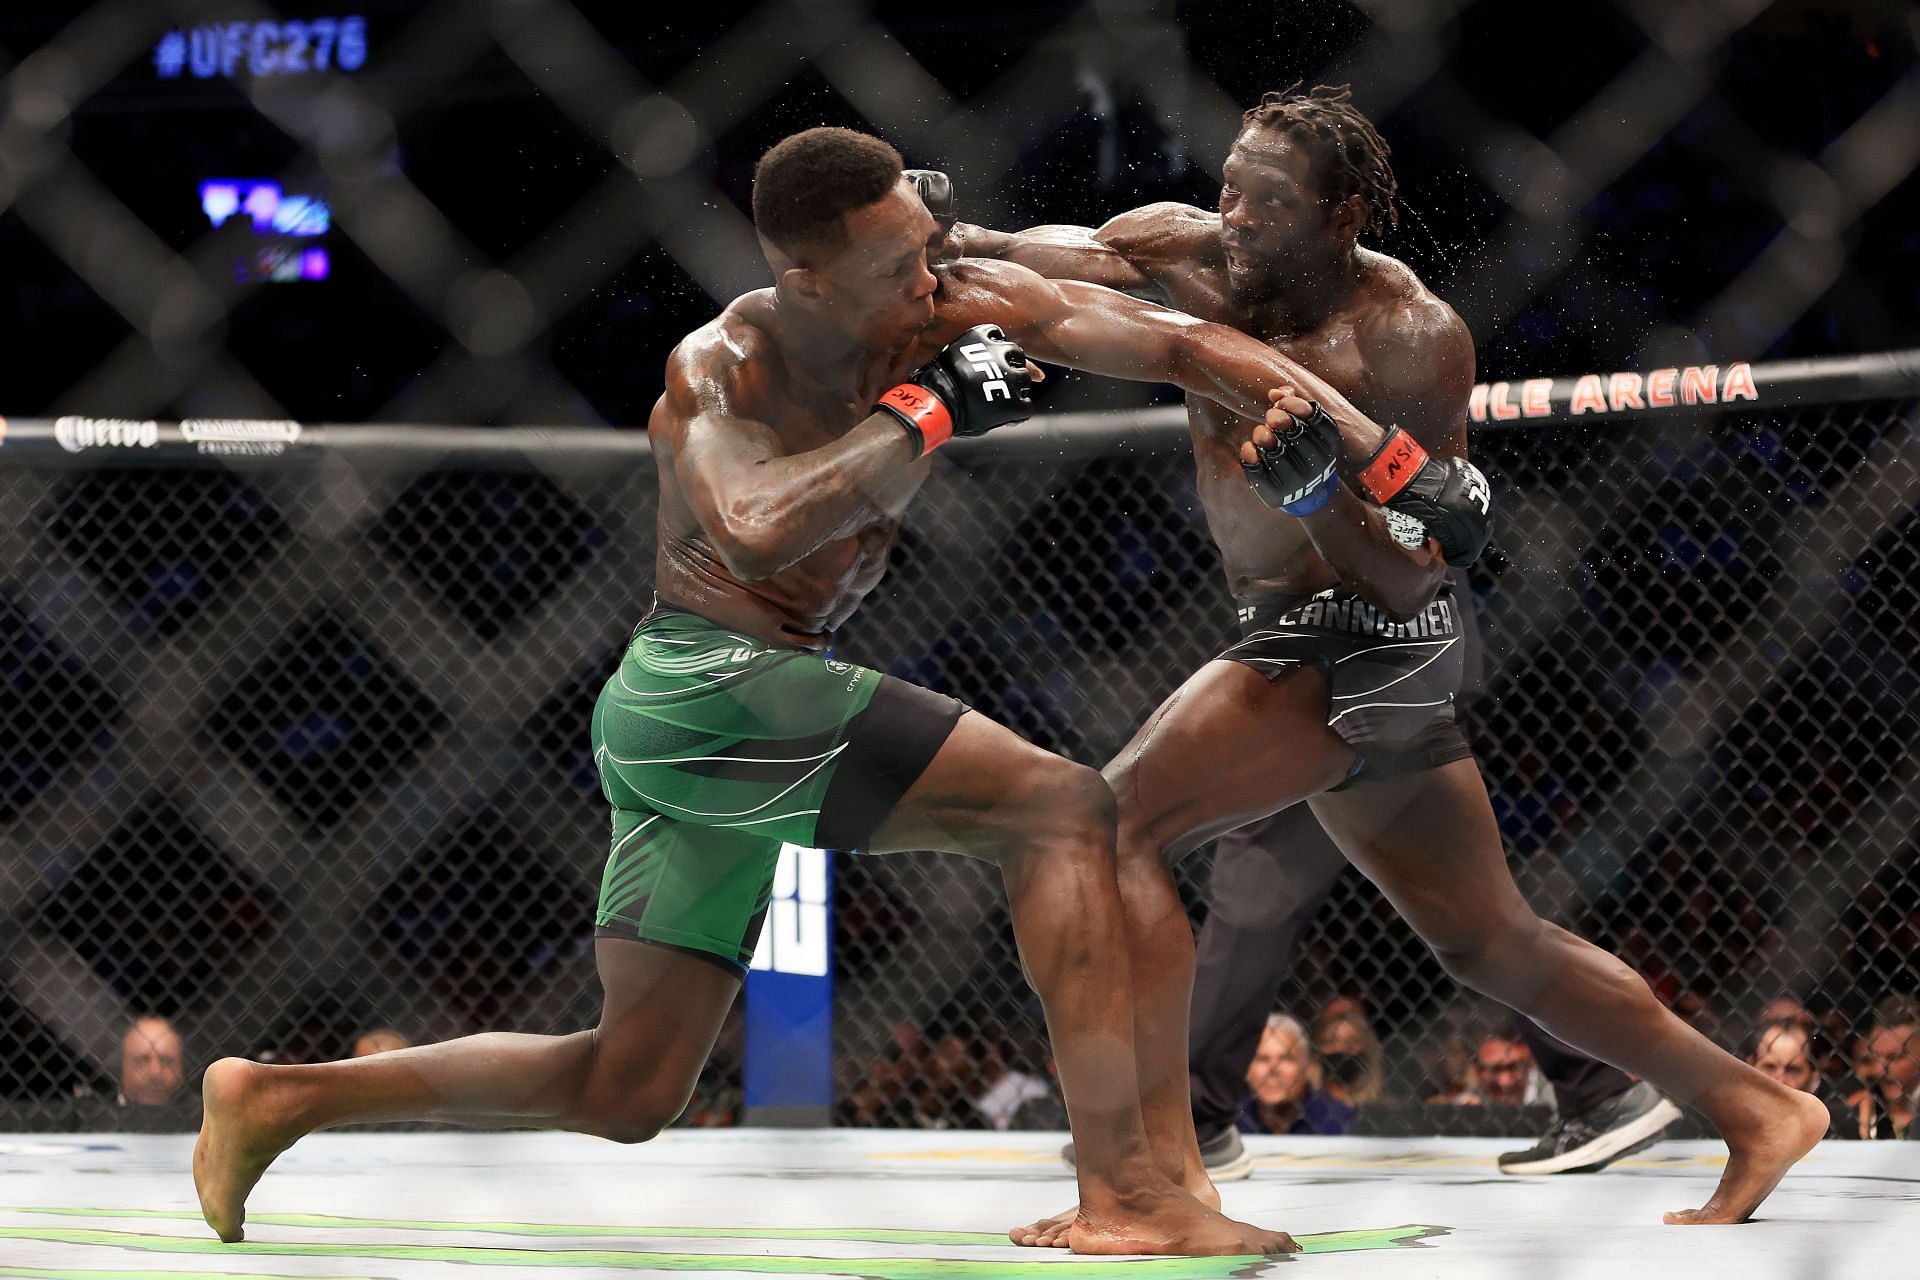 Israel Adesanya has come under fire recently for a perceived dull fighting style